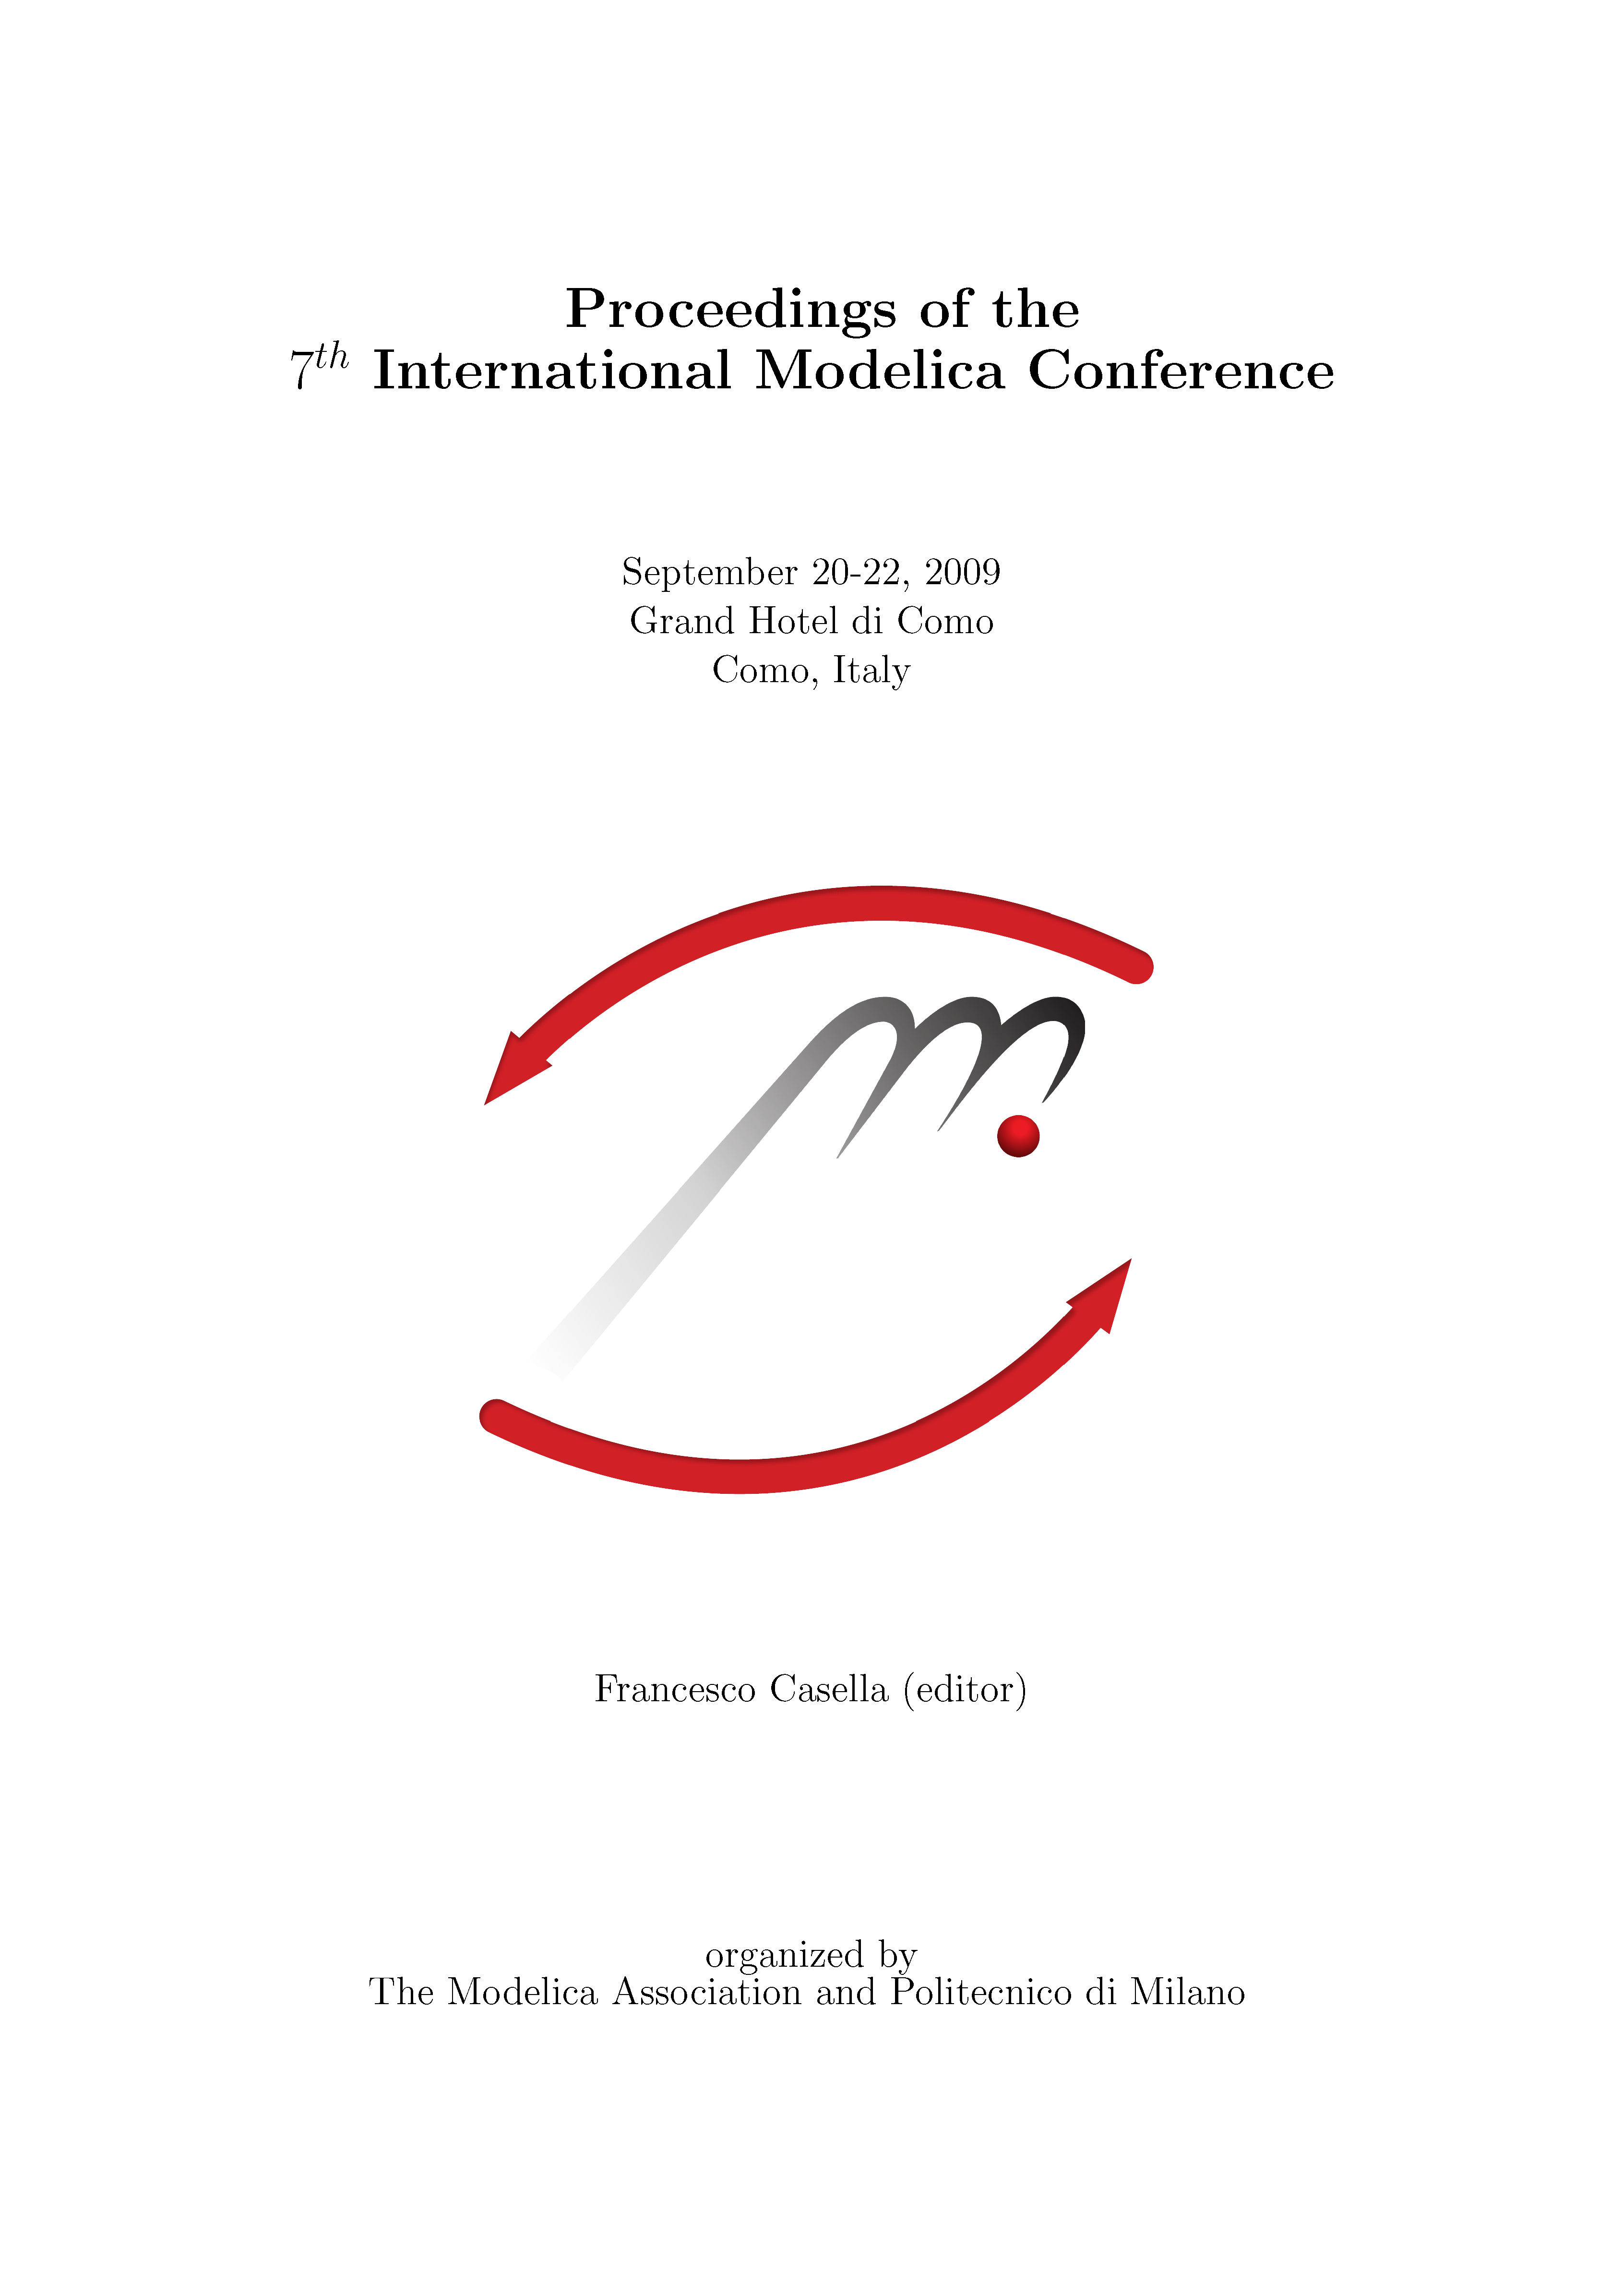 					View Proceedings of the 7th International Modelica Conference, Como, Italy, 20-22 September, 2009
				